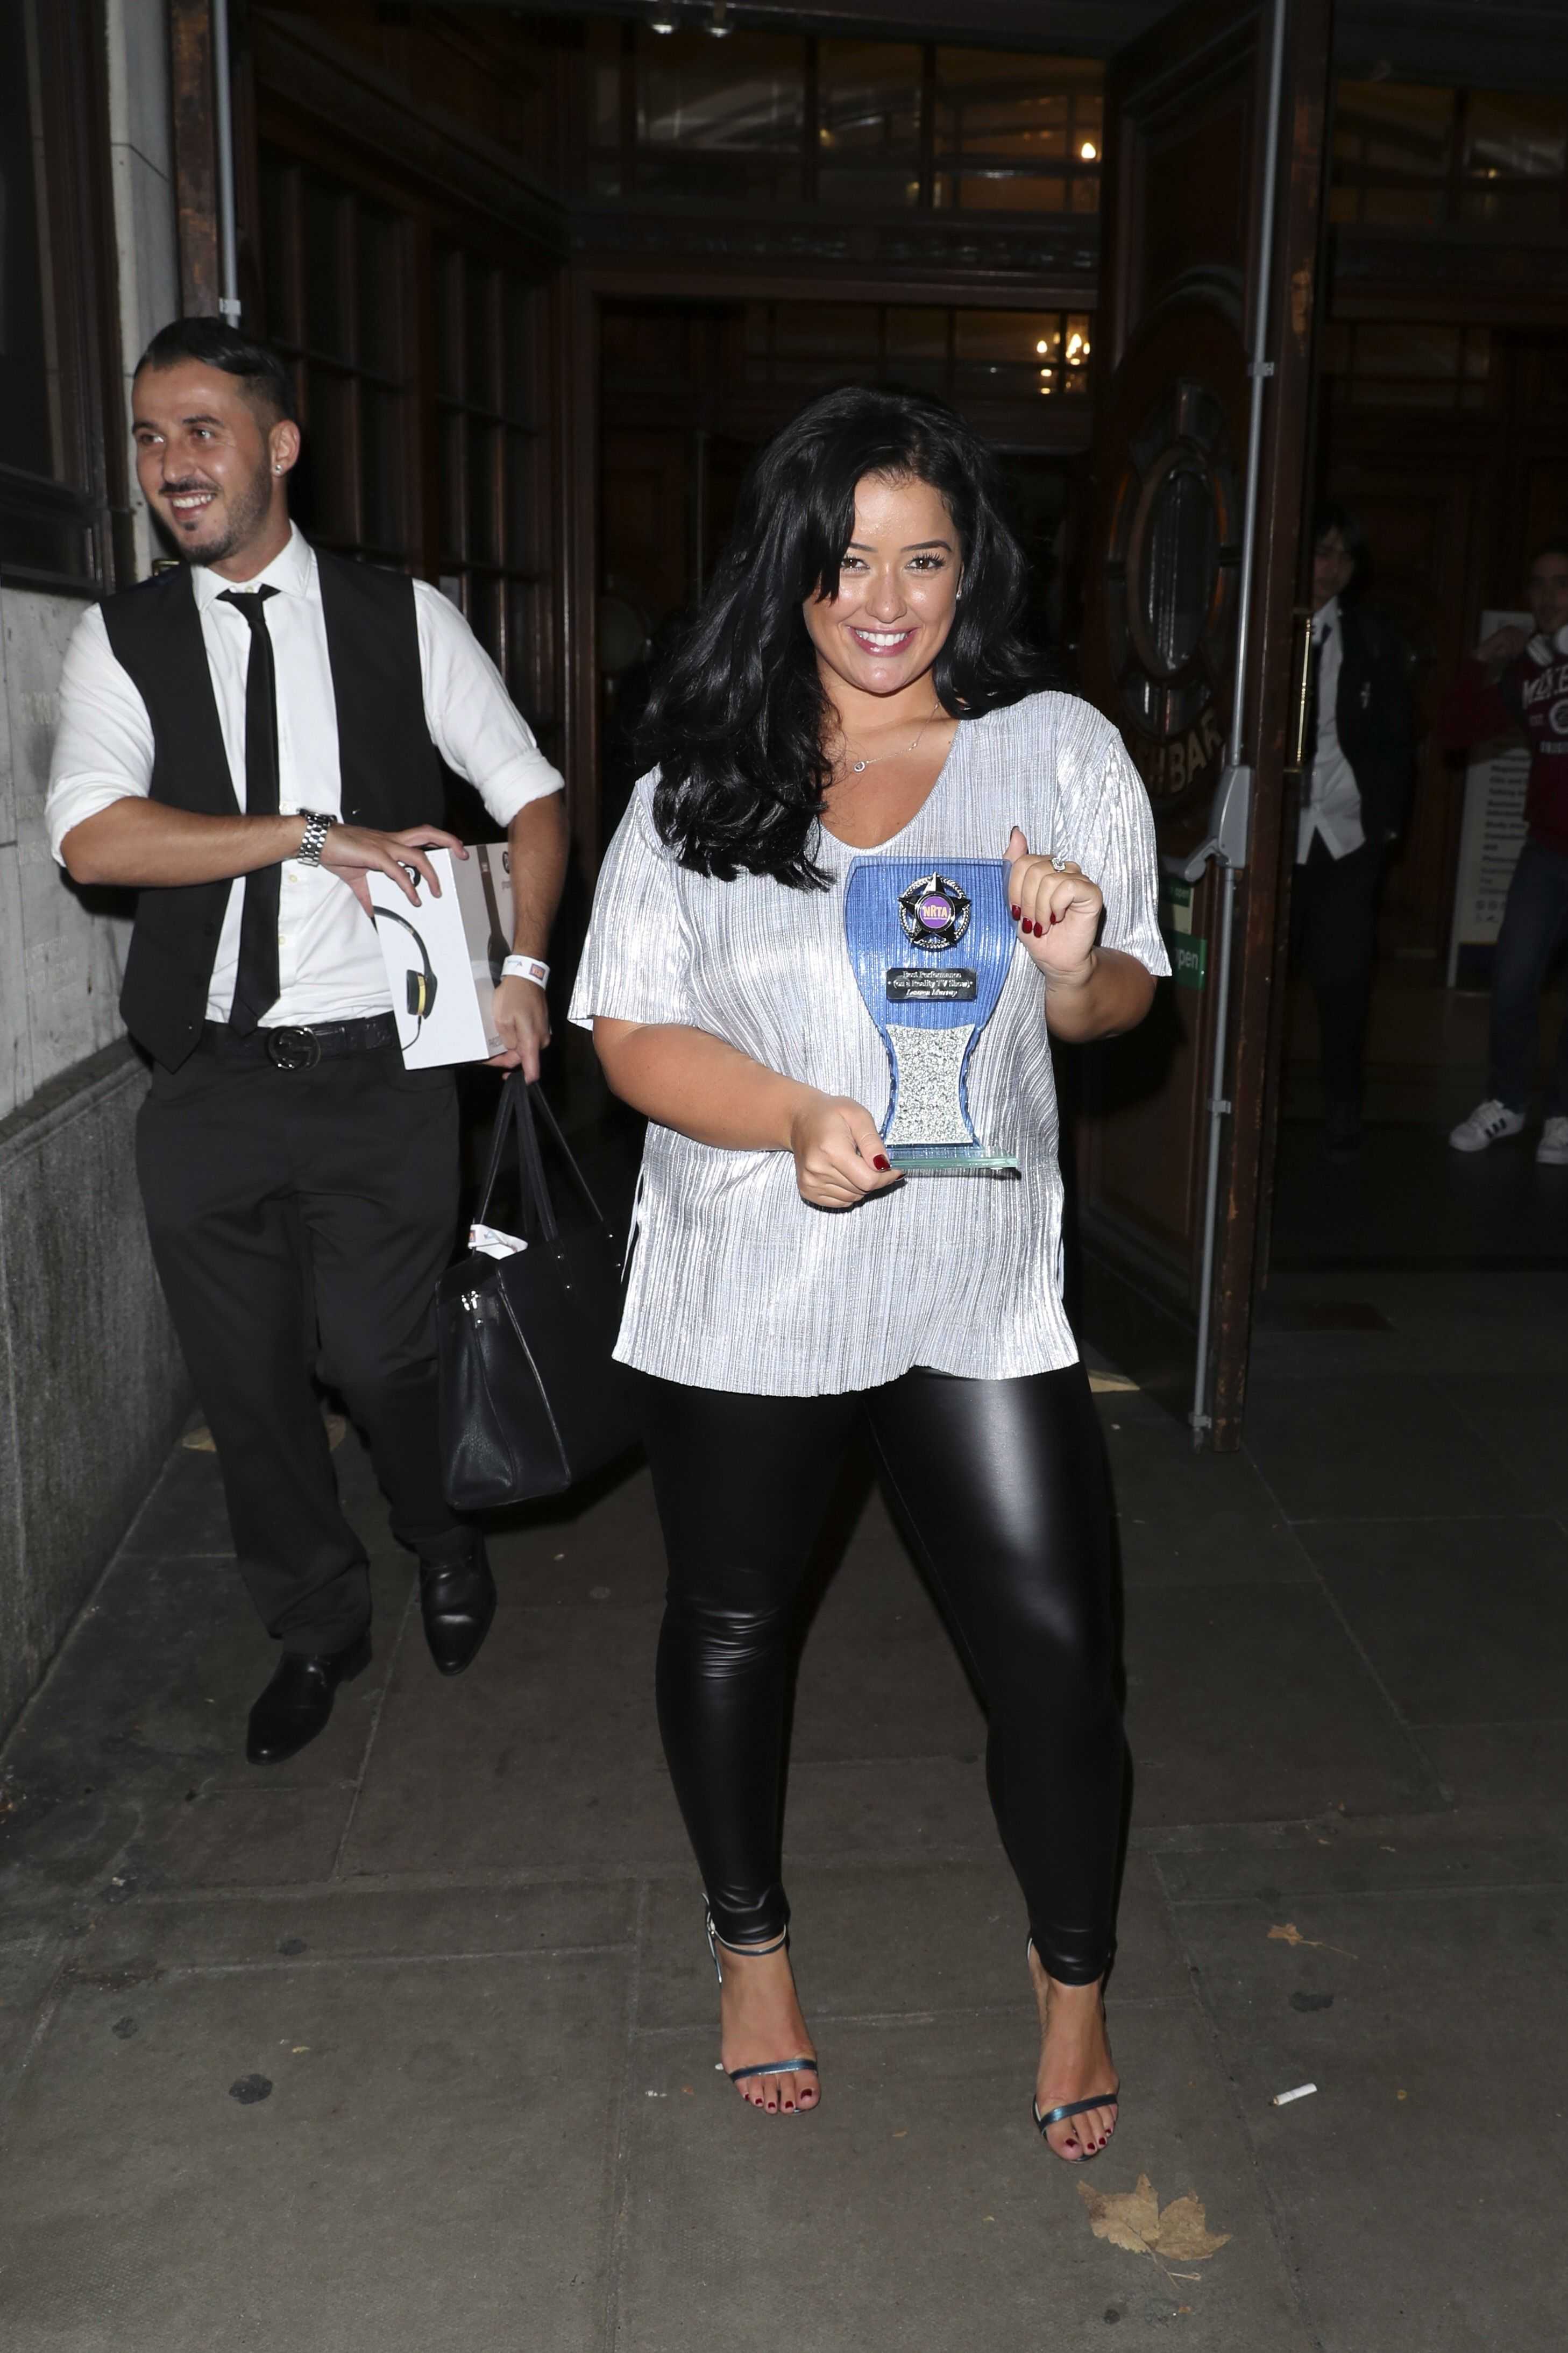 Lauren Murray attends The National Reality TV Awards